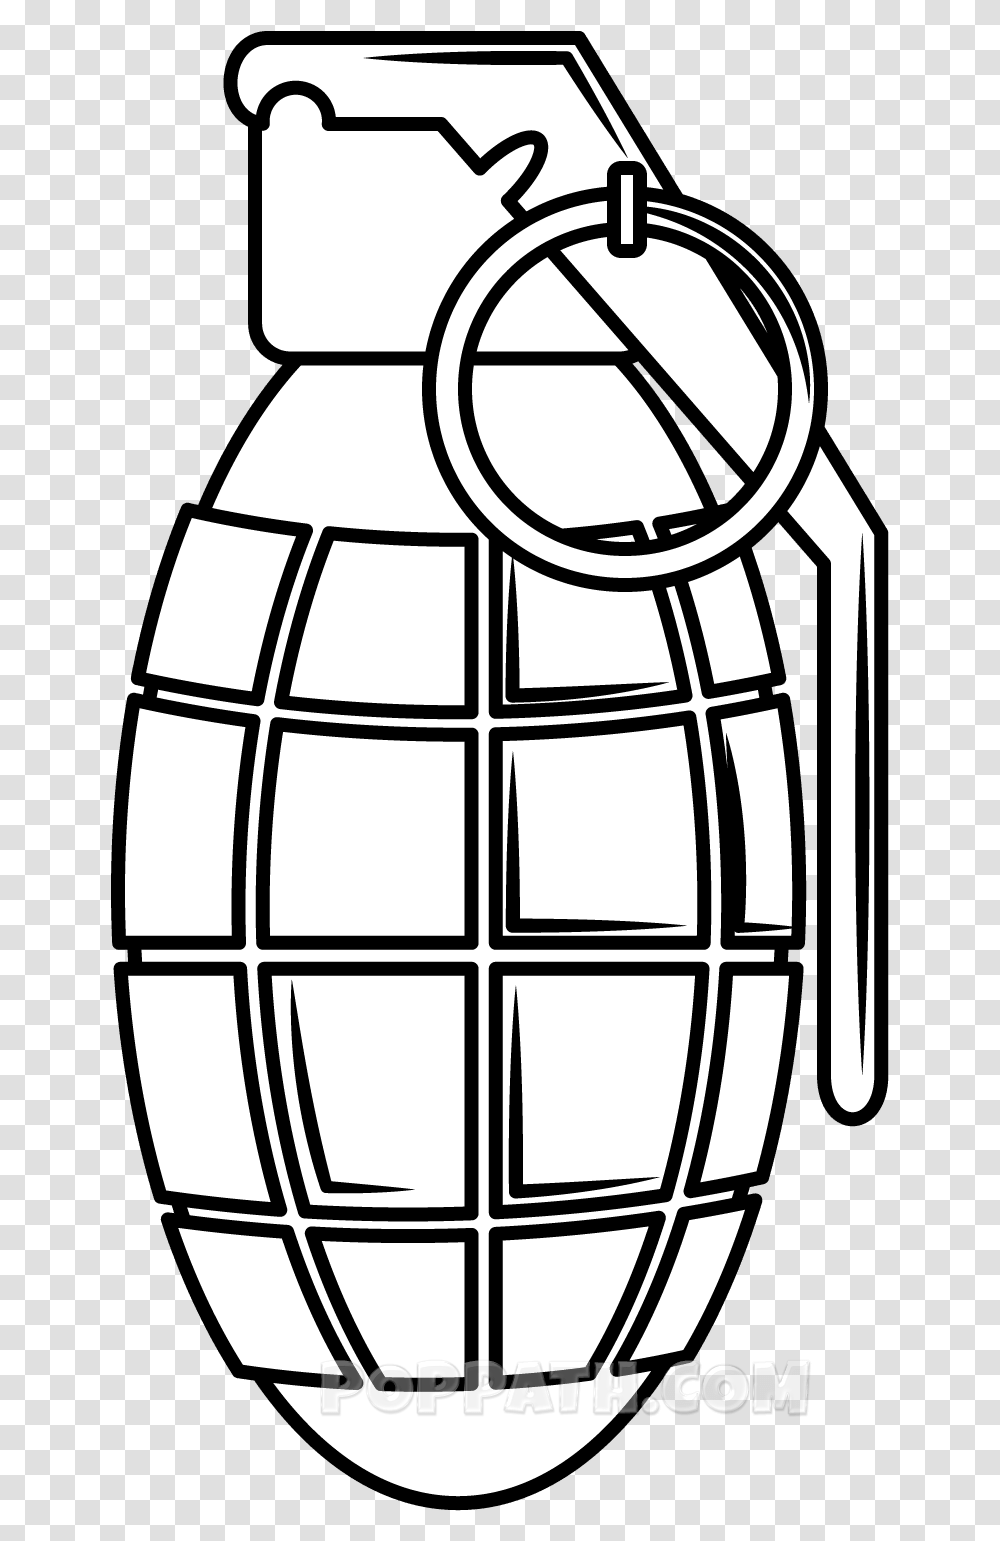 Clip Art Grenade Clipart Grenade Clipart, Bomb, Weapon, Weaponry Transparent Png